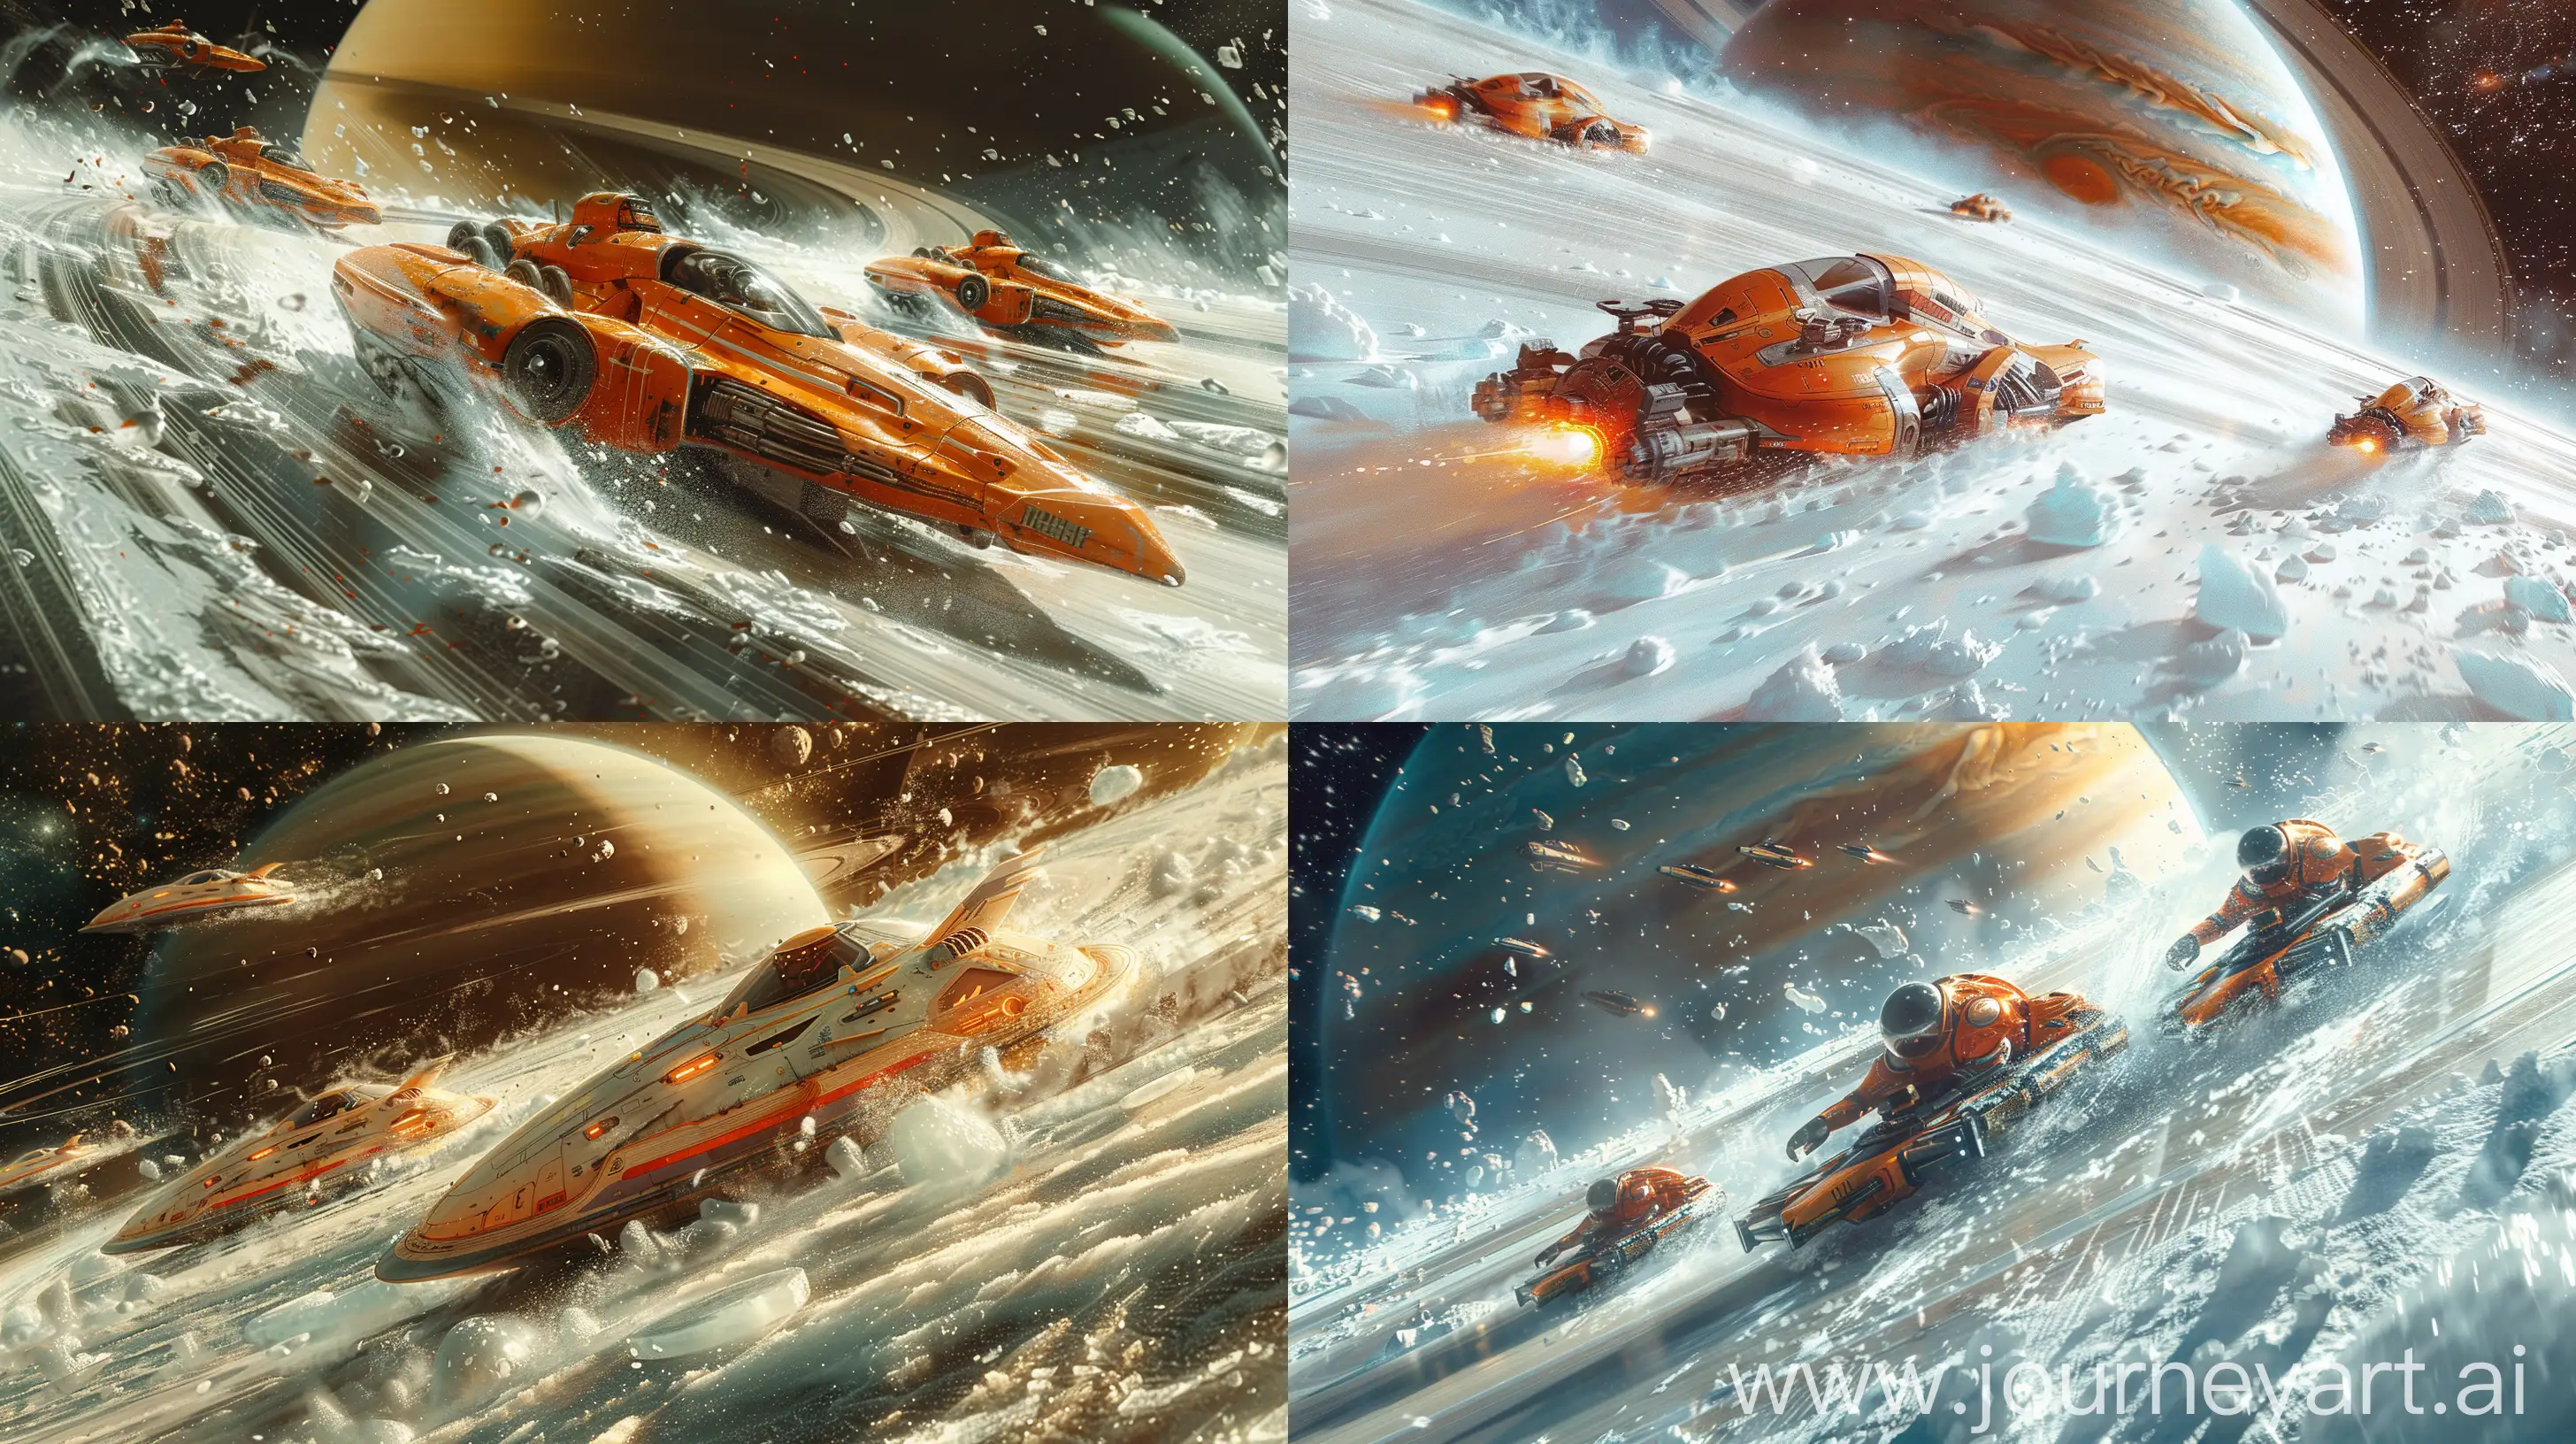 HighSpeed-Extraterrestrial-Race-on-Saturns-Rings-Vibrant-SciFi-Concept-Art